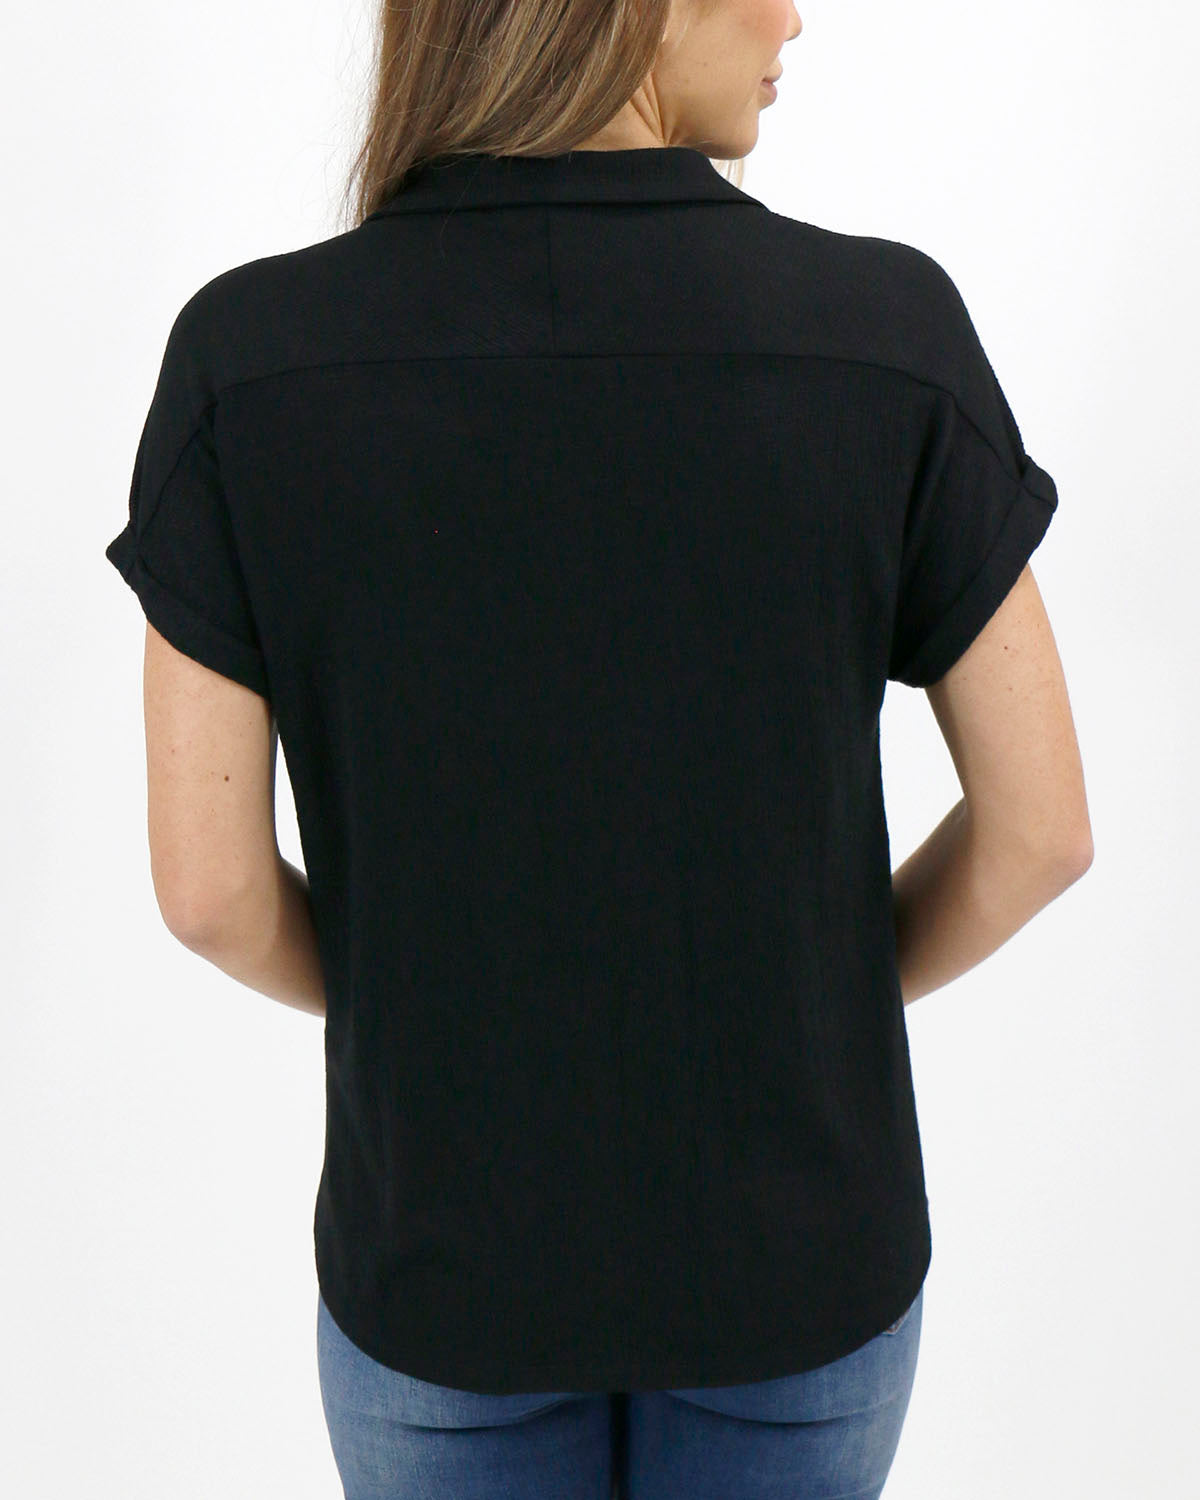 Easy Slouch Button Down Top in Black - FINAL SALE